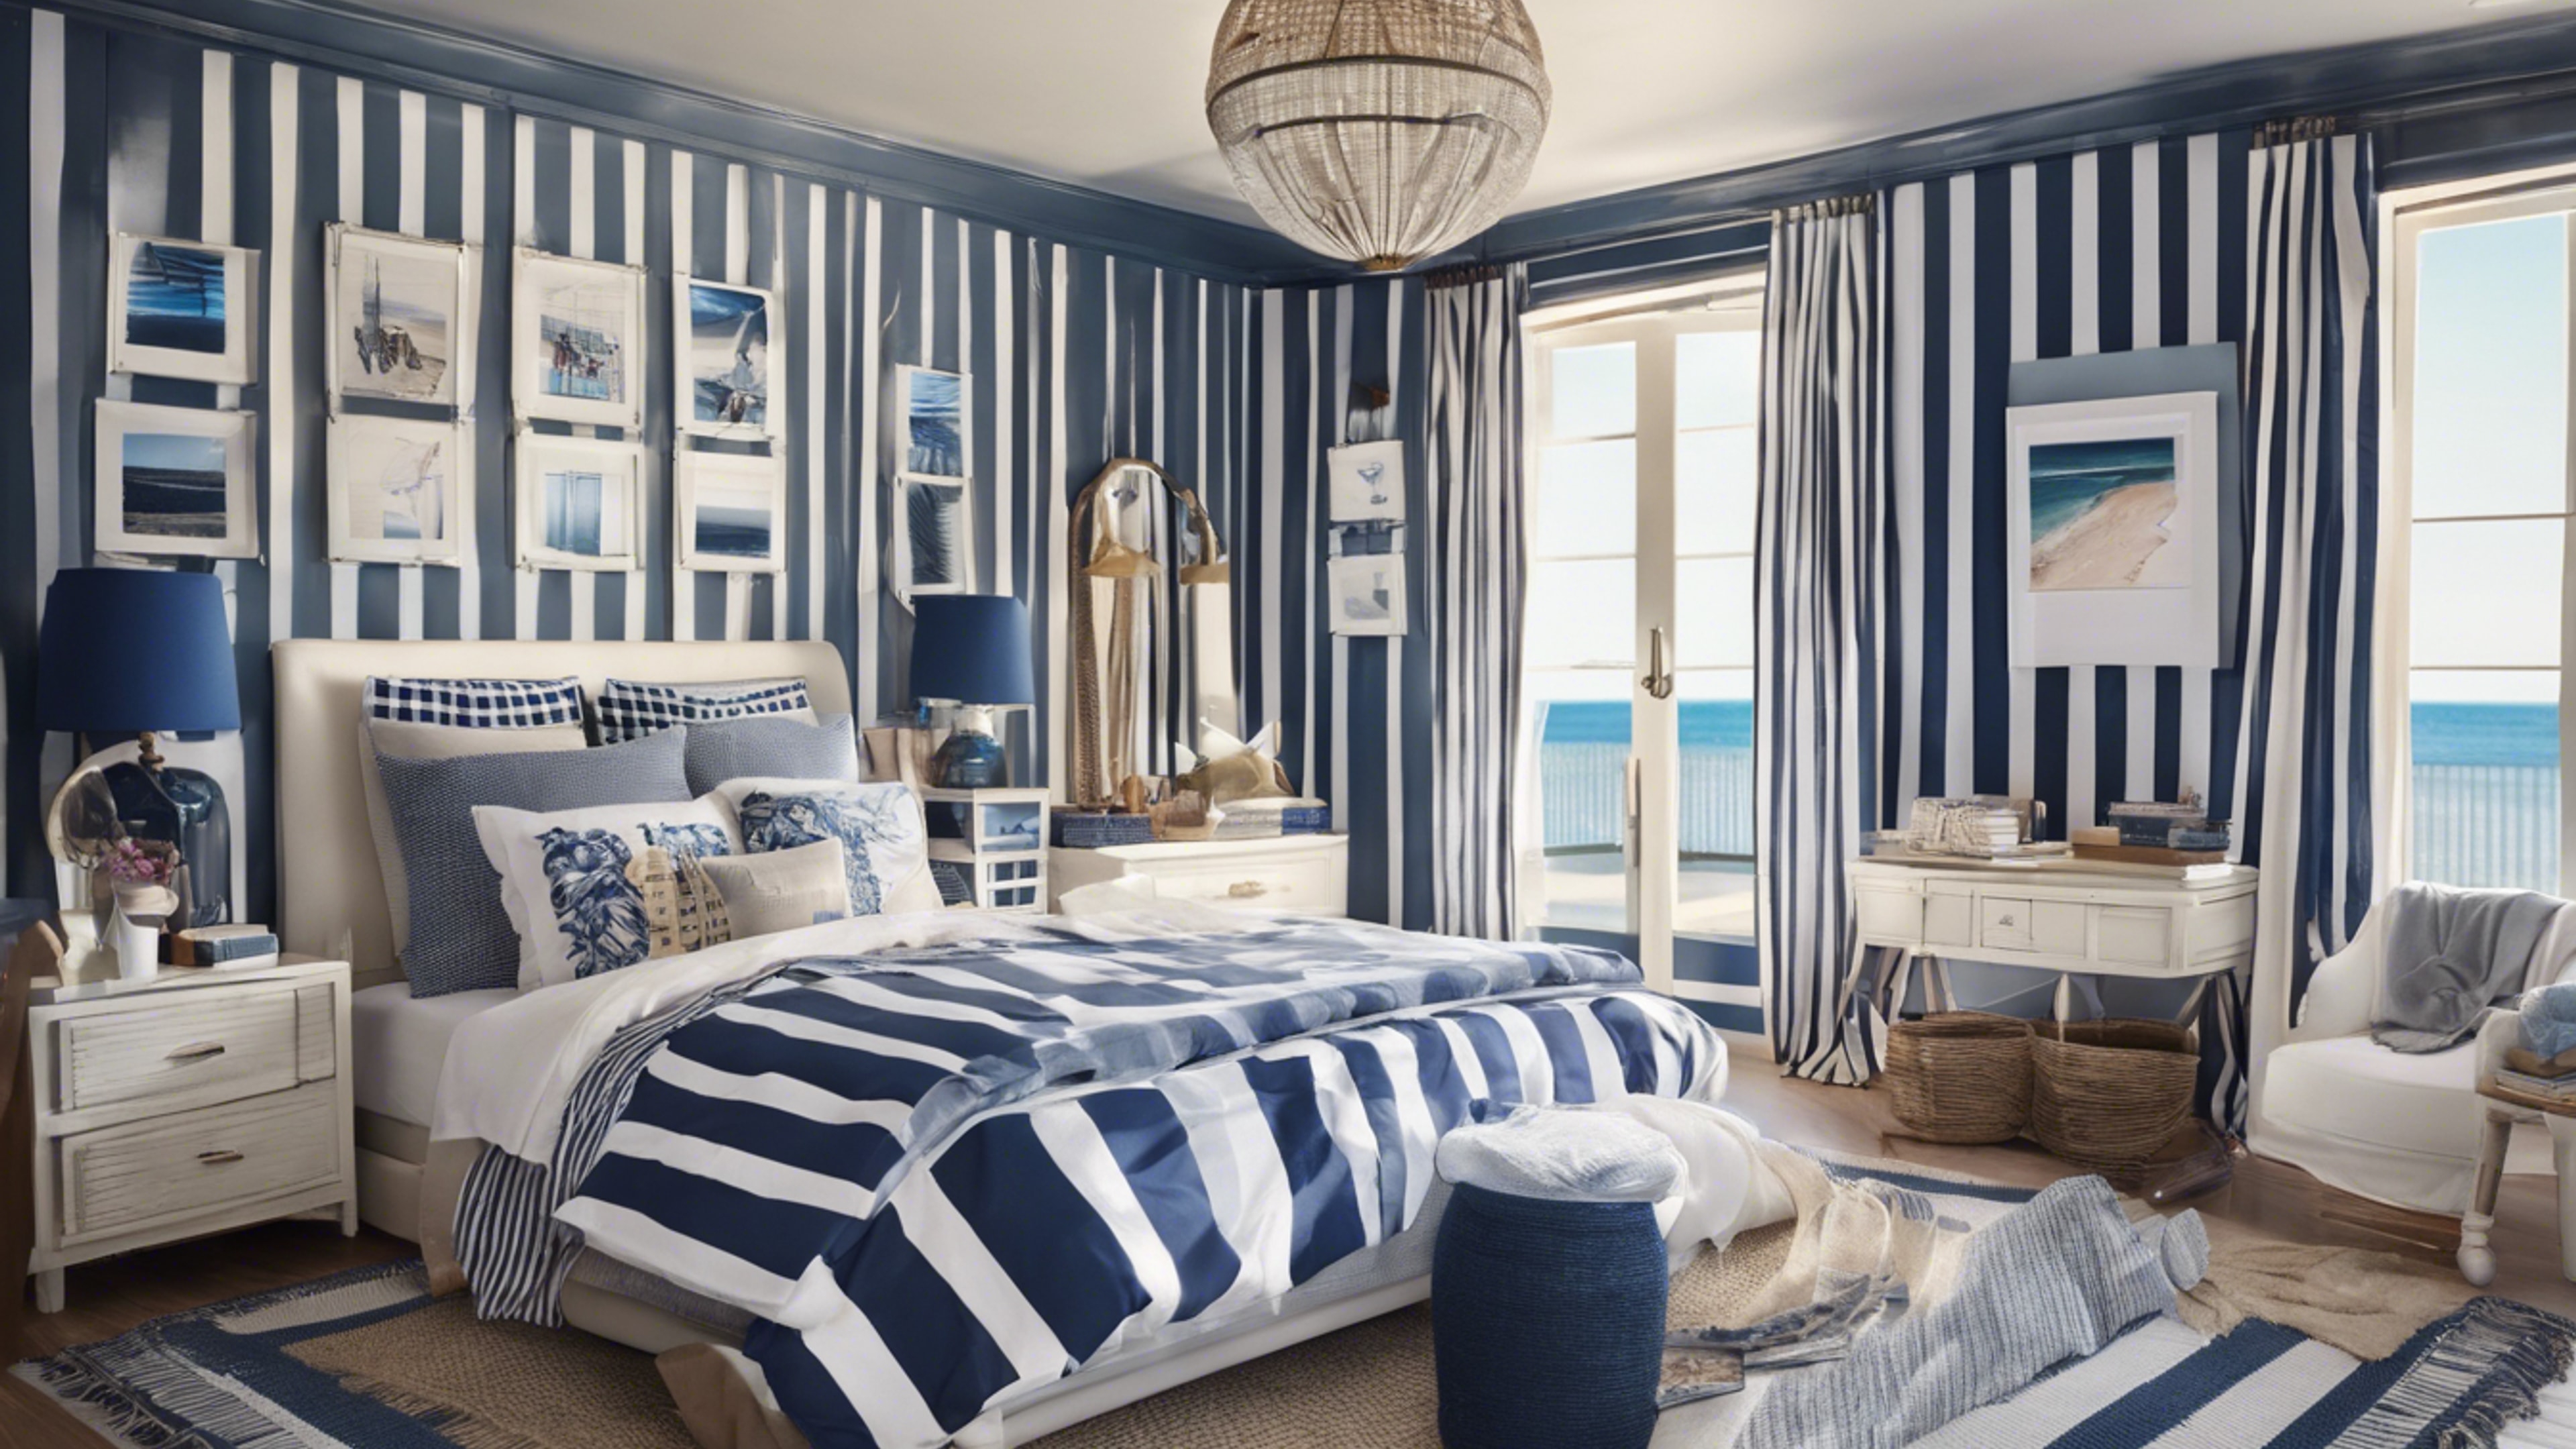 A relaxing preppy bedroom with a coastal charm, decorated with bold navy blue and white stripes, and summer beach elements. Wallpaper[35683537743b4598a571]